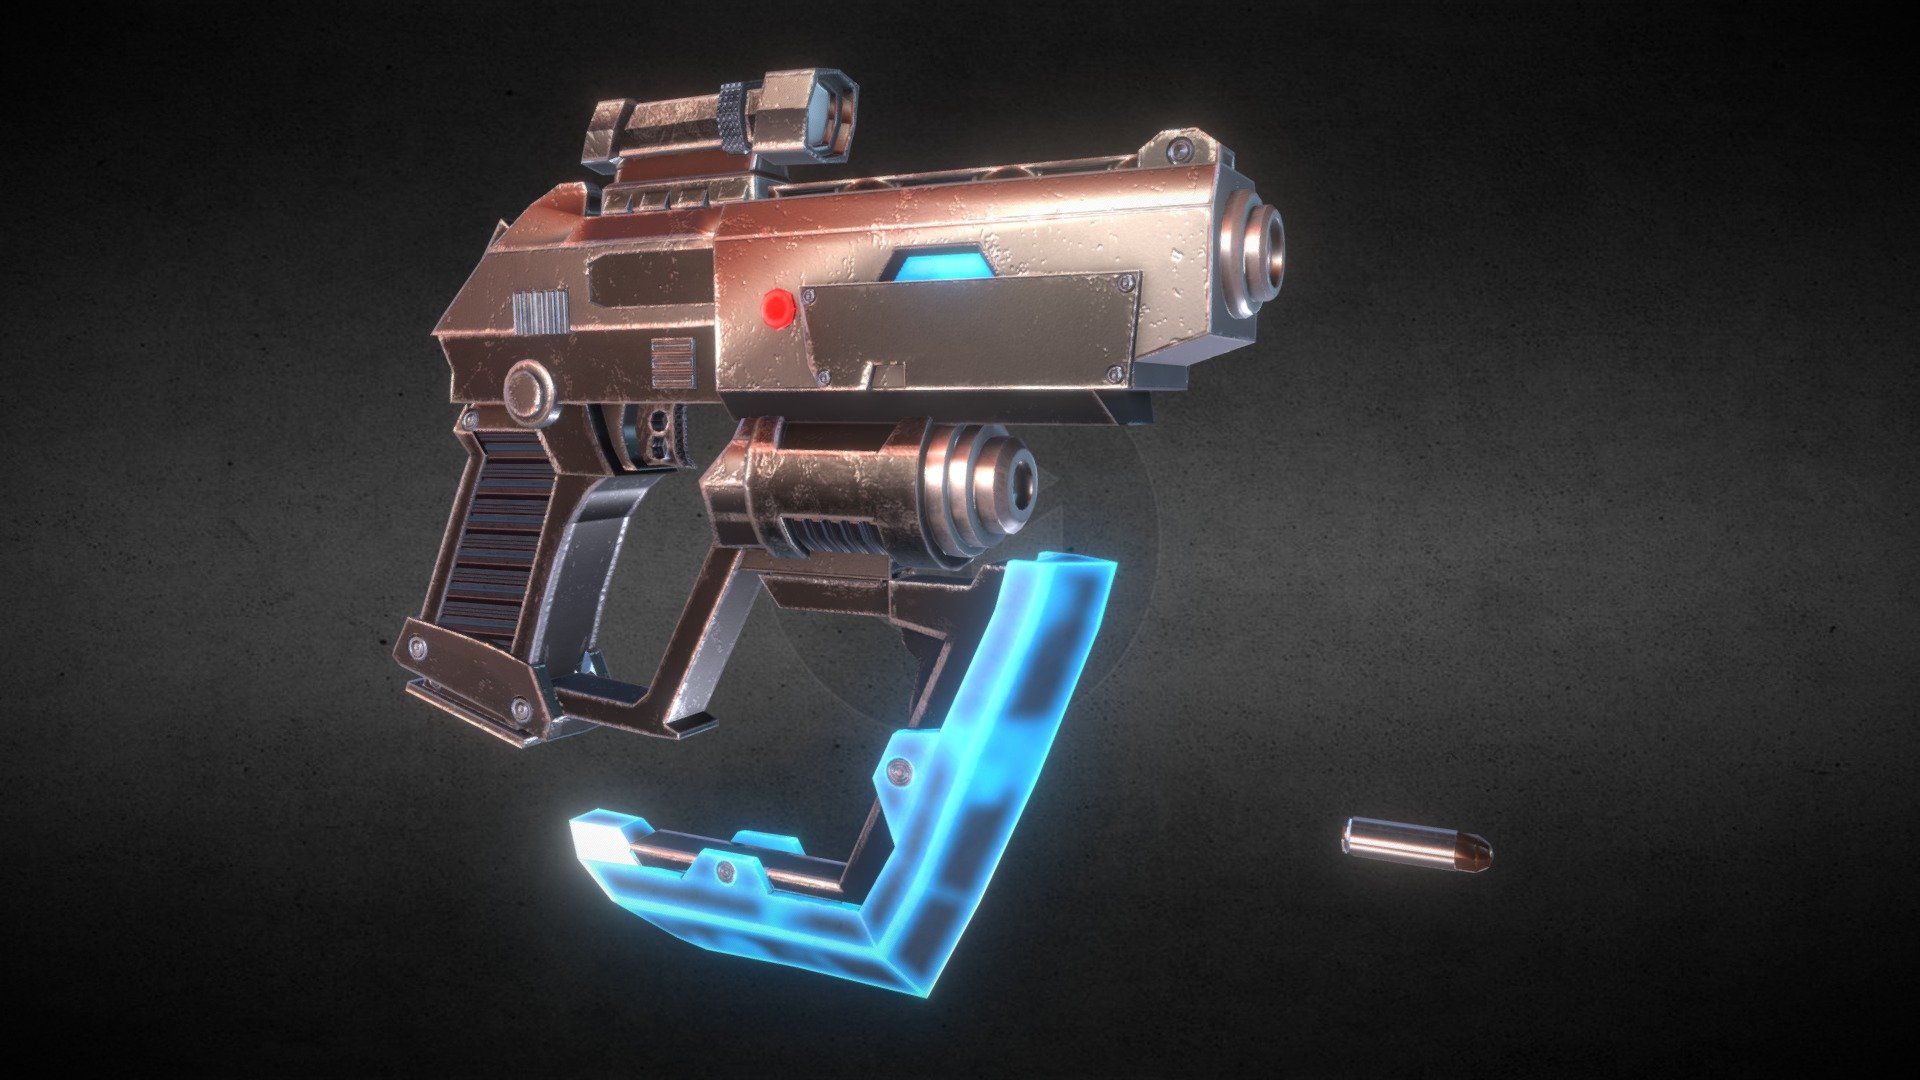 A Sci-Fi Eagle Gun the weapon has 2028 verts 1834 polys and 3582 tris the bullet has 90 verts 88 polys and 160 tris the eagle is separate each part the frame, scope, the blade, the backpack, and trigger, ready for a game engine the texture is 20x48 x 2048 include diffuse, metal, emissive and the normal map as a plus I include an Urban Camo Texture Version, a Christmas Texture Version and as a fun practice a Cat pattern Version 3d model